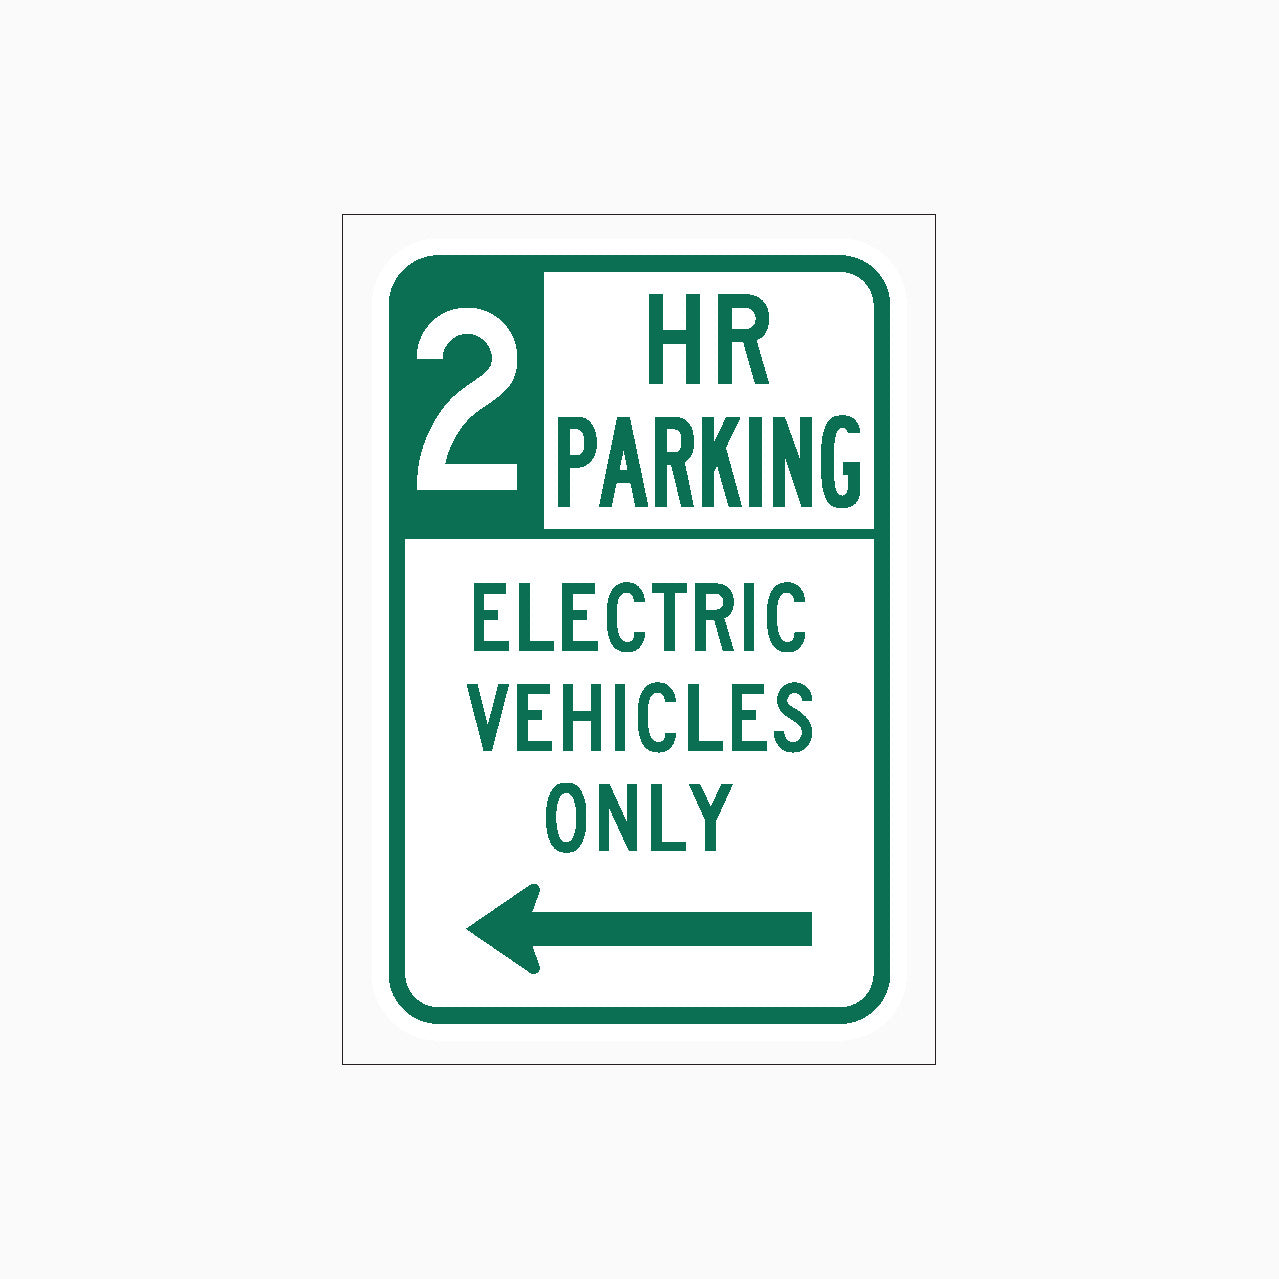 2HR PARKING - ELECTRIC VEHICLES ONLY